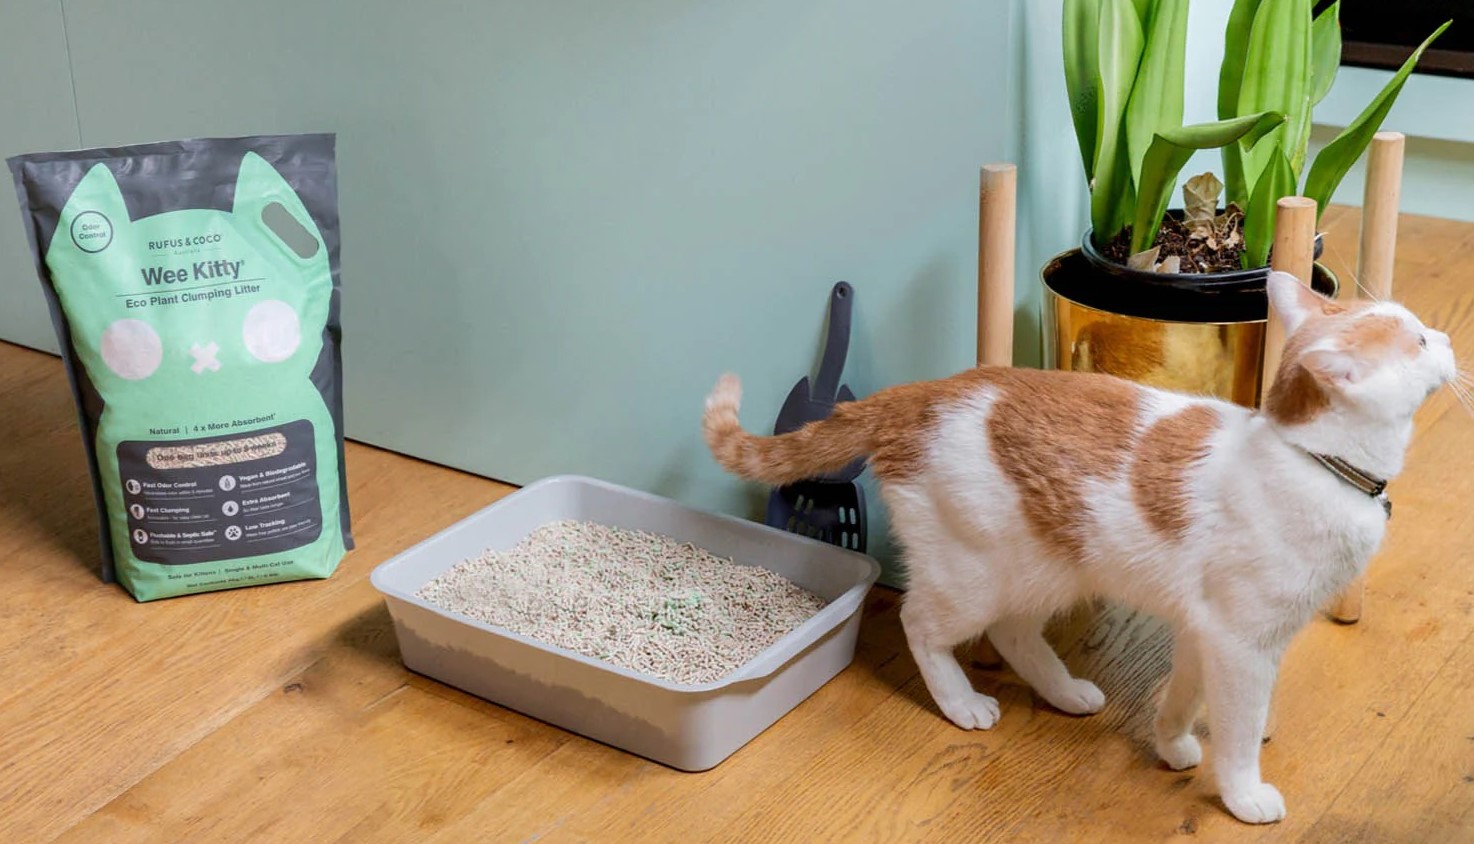 The Ultimate Guide To The Best Natural Kitty Litter For Odor Control And Clumping (No Cedar!)